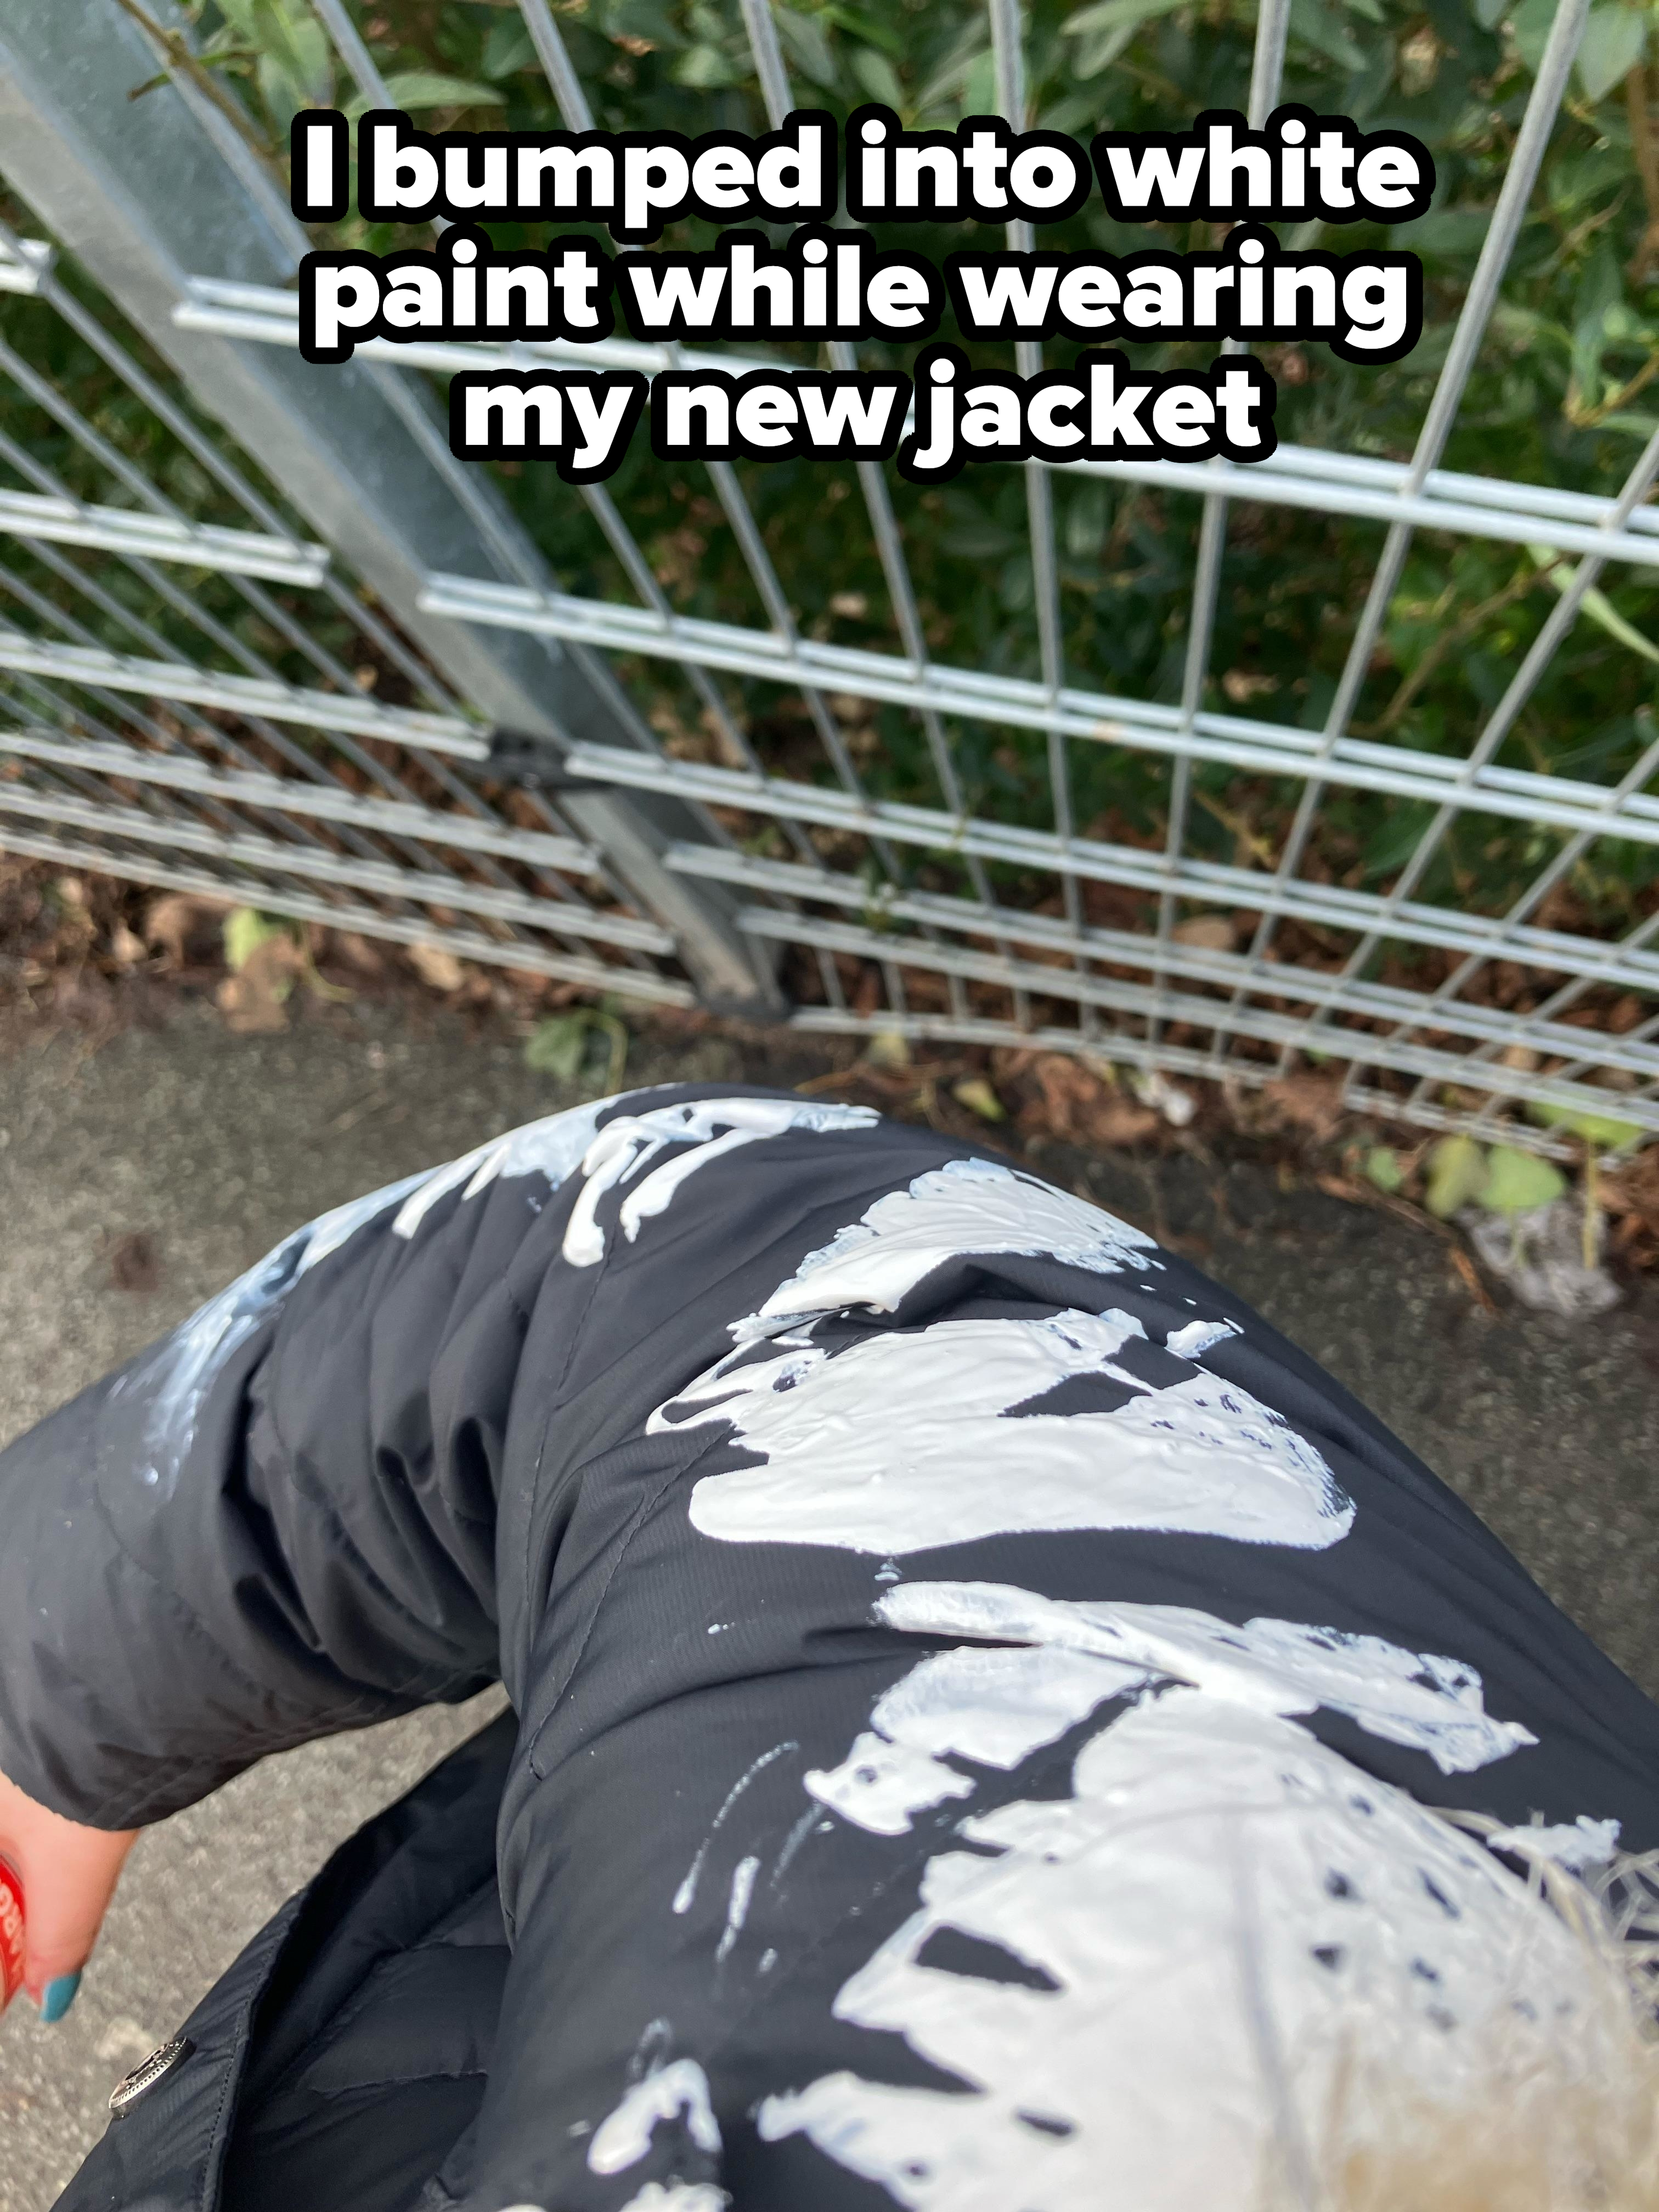 A person&#x27;s new jacket splattered with white paint against a metal fence backdrop